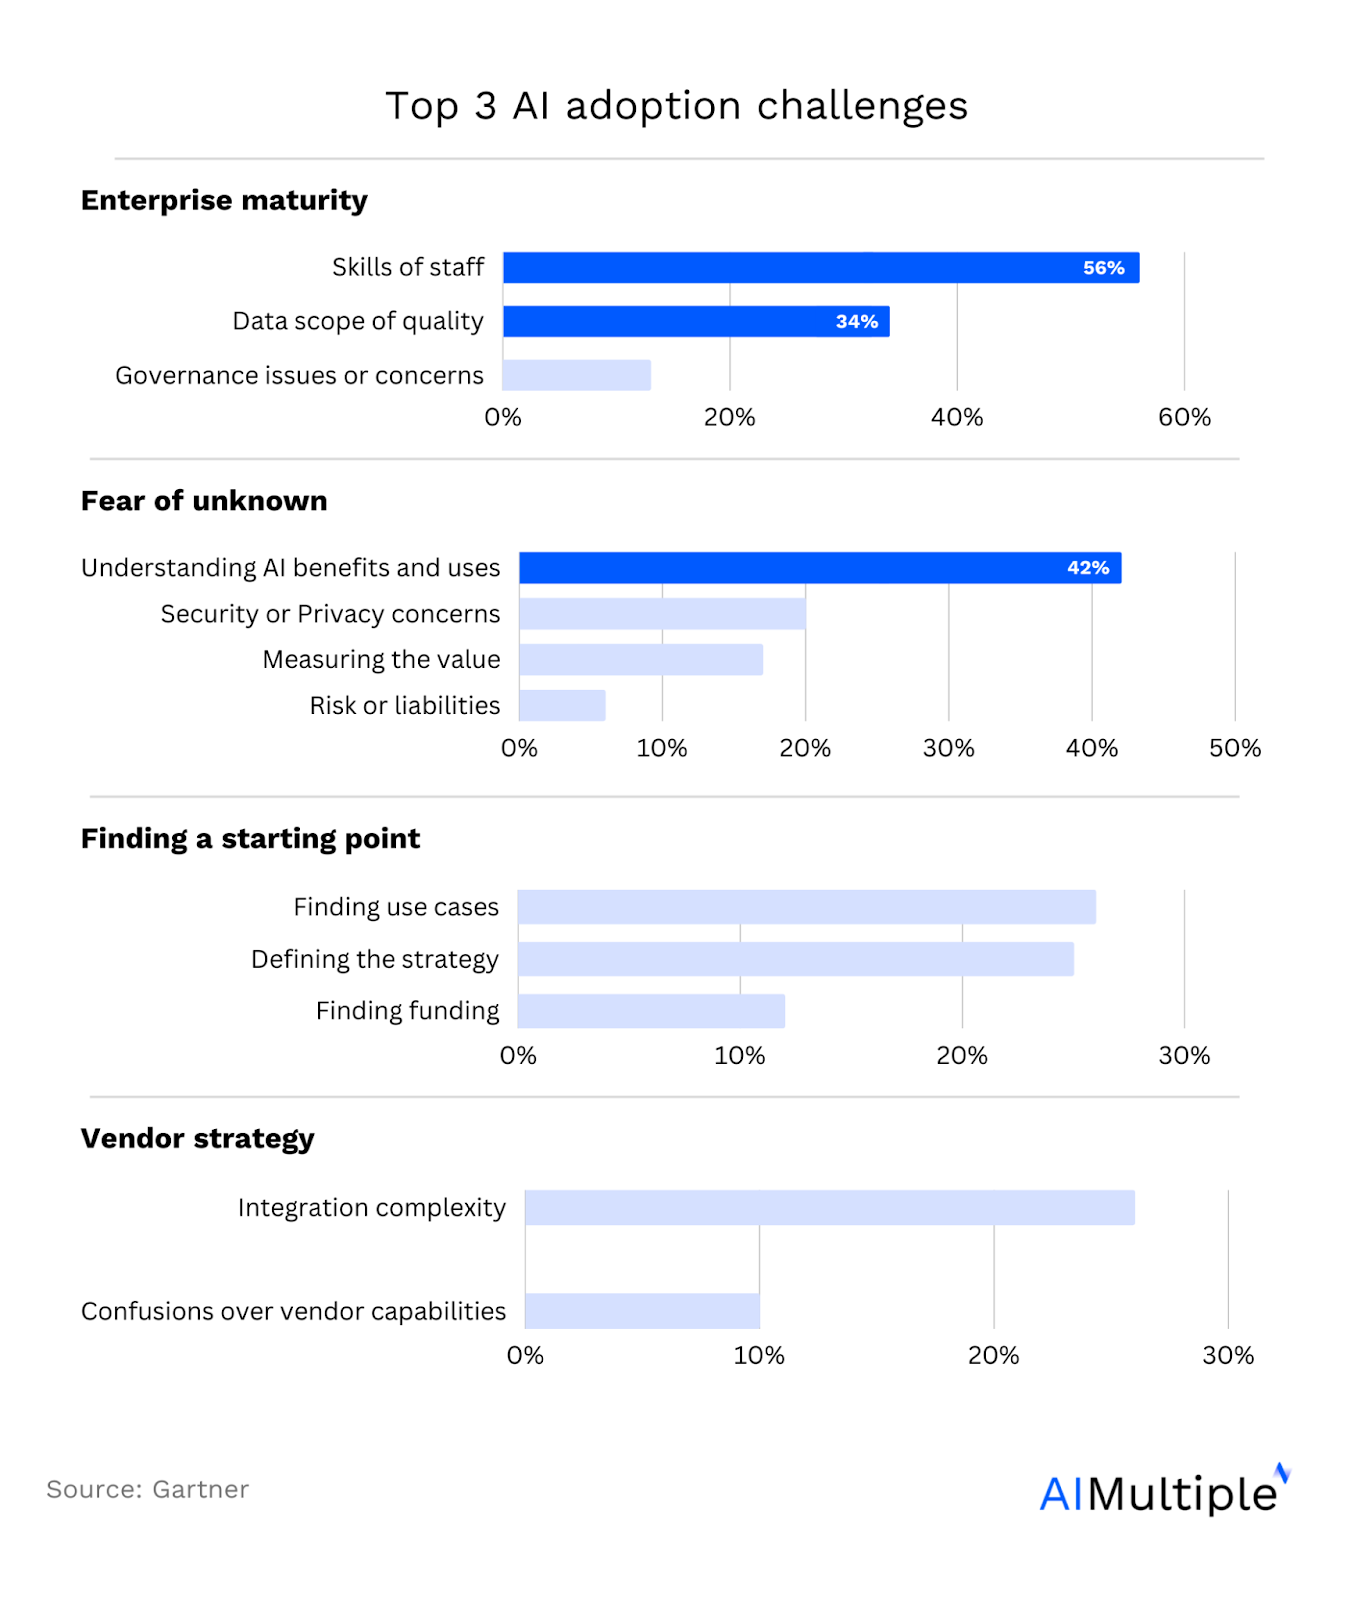 A graph showing that high-quality data is among the top 3 barriers in the process of developing ai. The other 2 include skills of staff and understanding ai benefits and uses. 